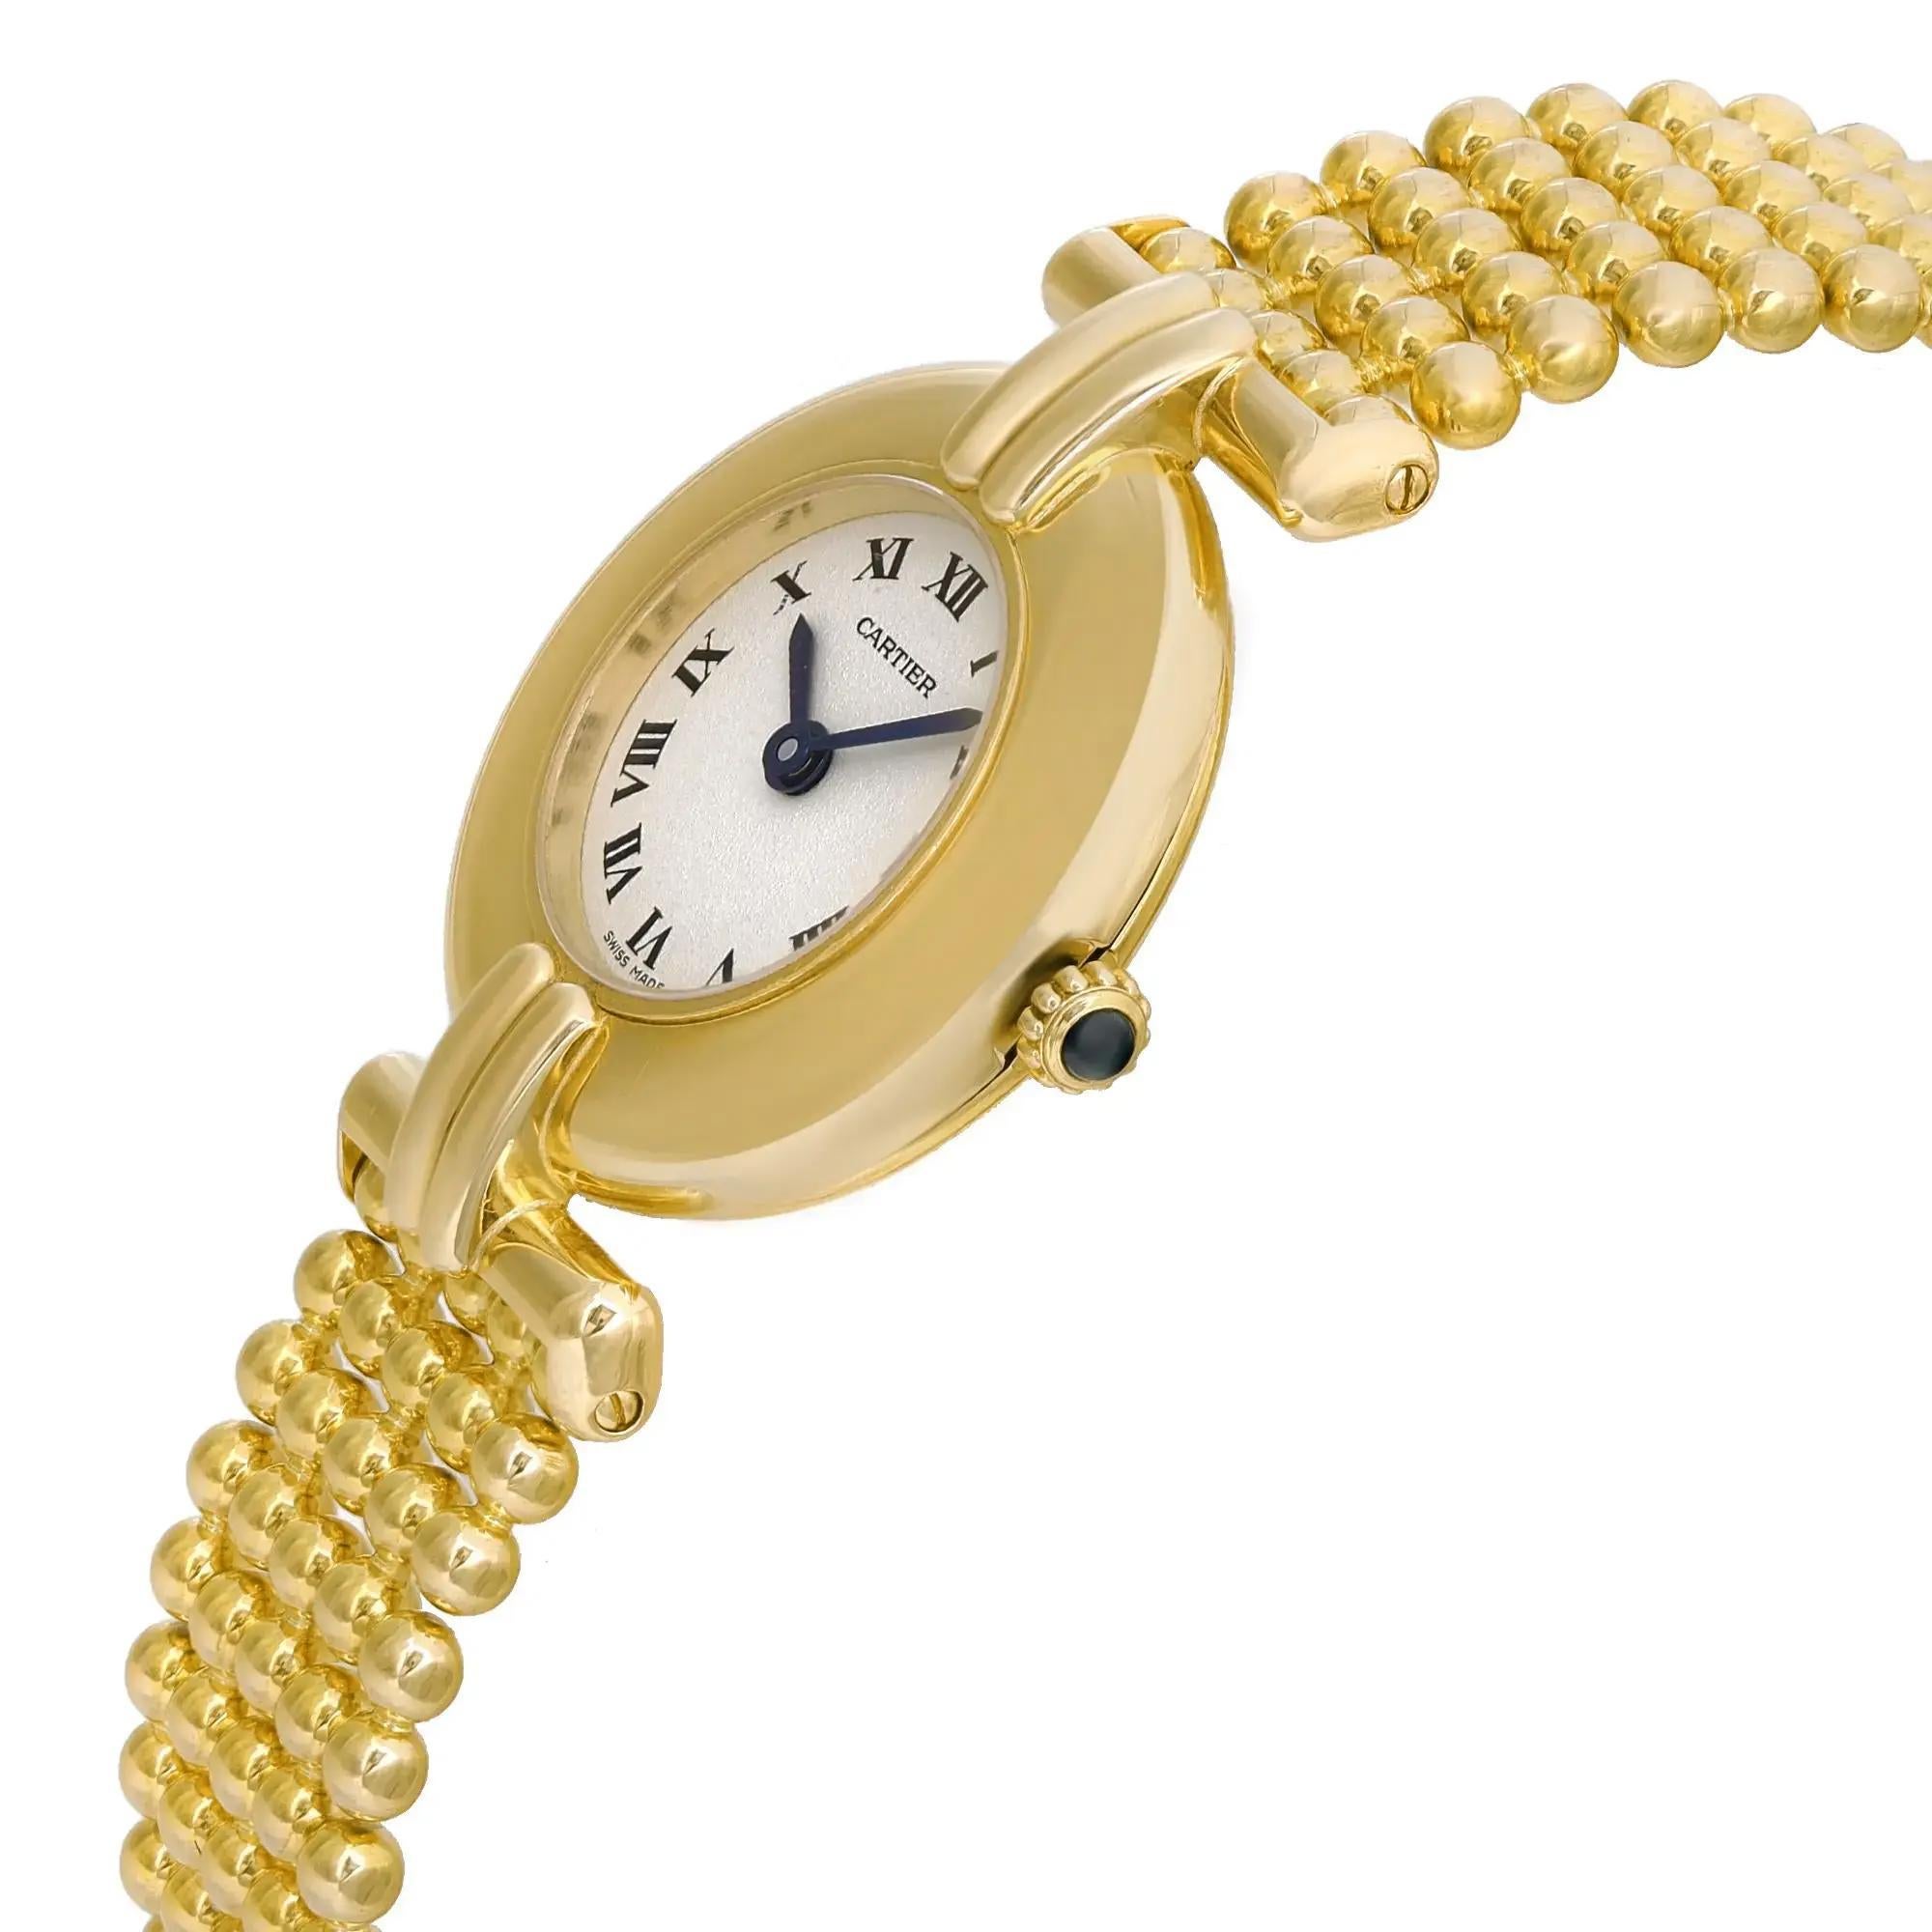 Cartier Rivoli 24mm 18K Yellow Gold White Dial Ladies Quartz Watch 881092 In Good Condition For Sale In New York, NY